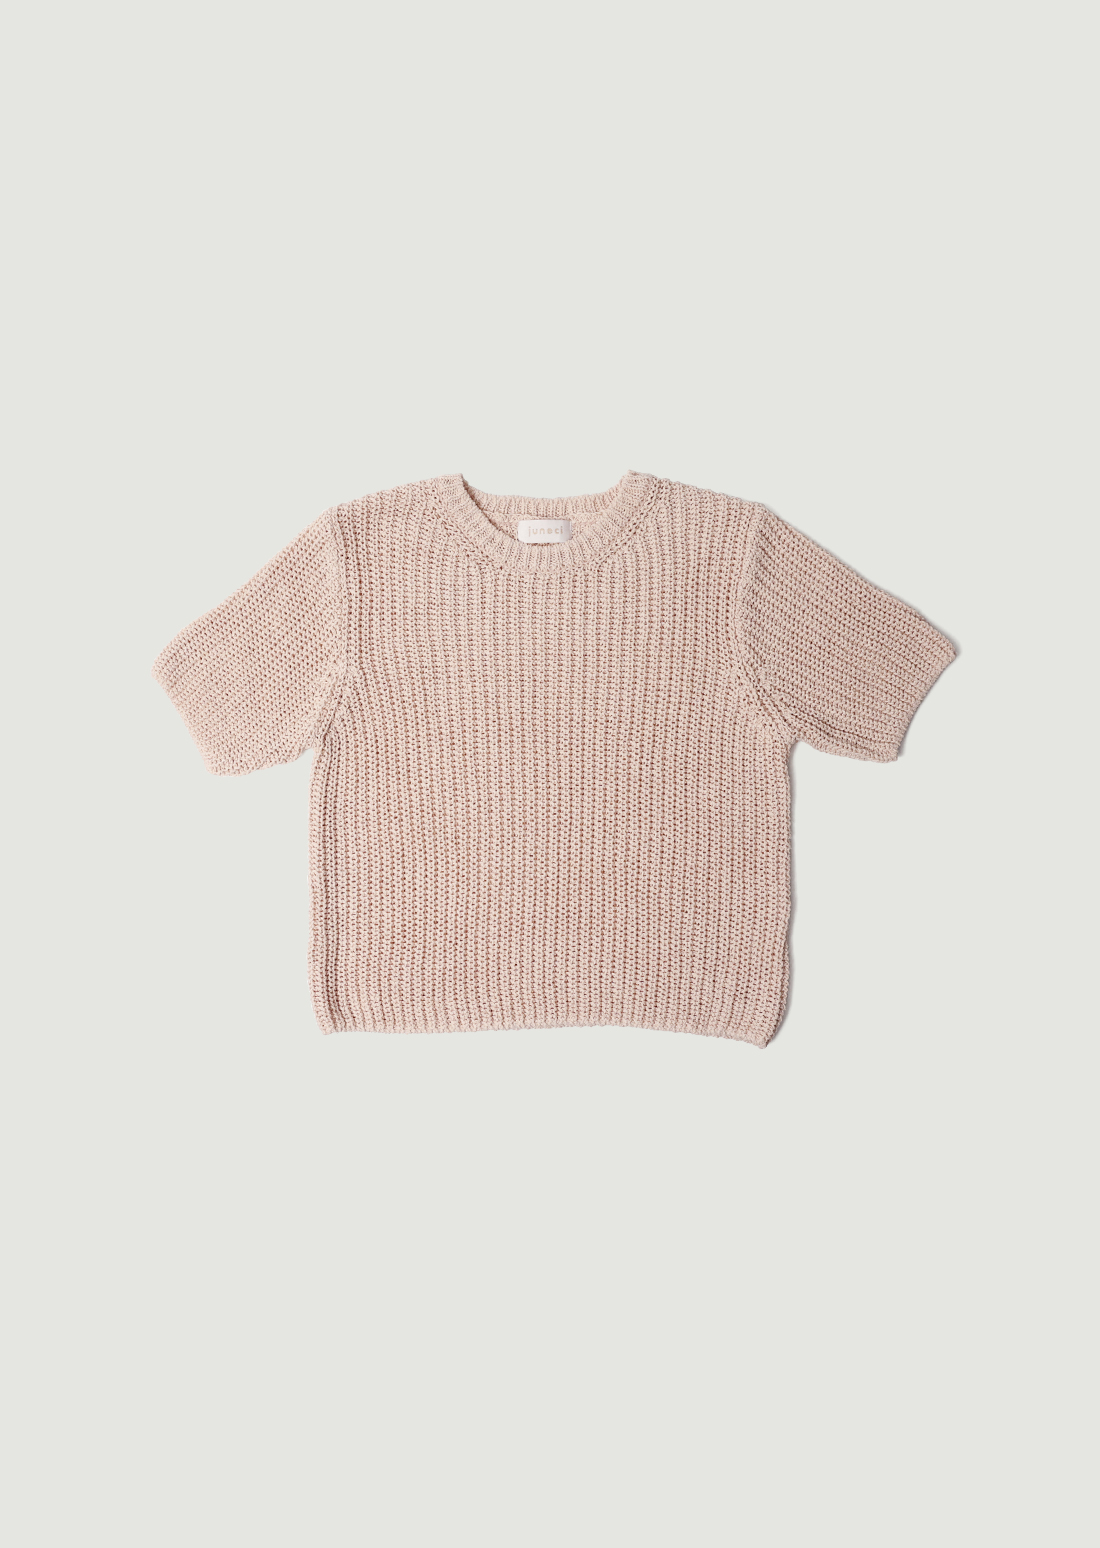 Harmony Knit Top (2 color)